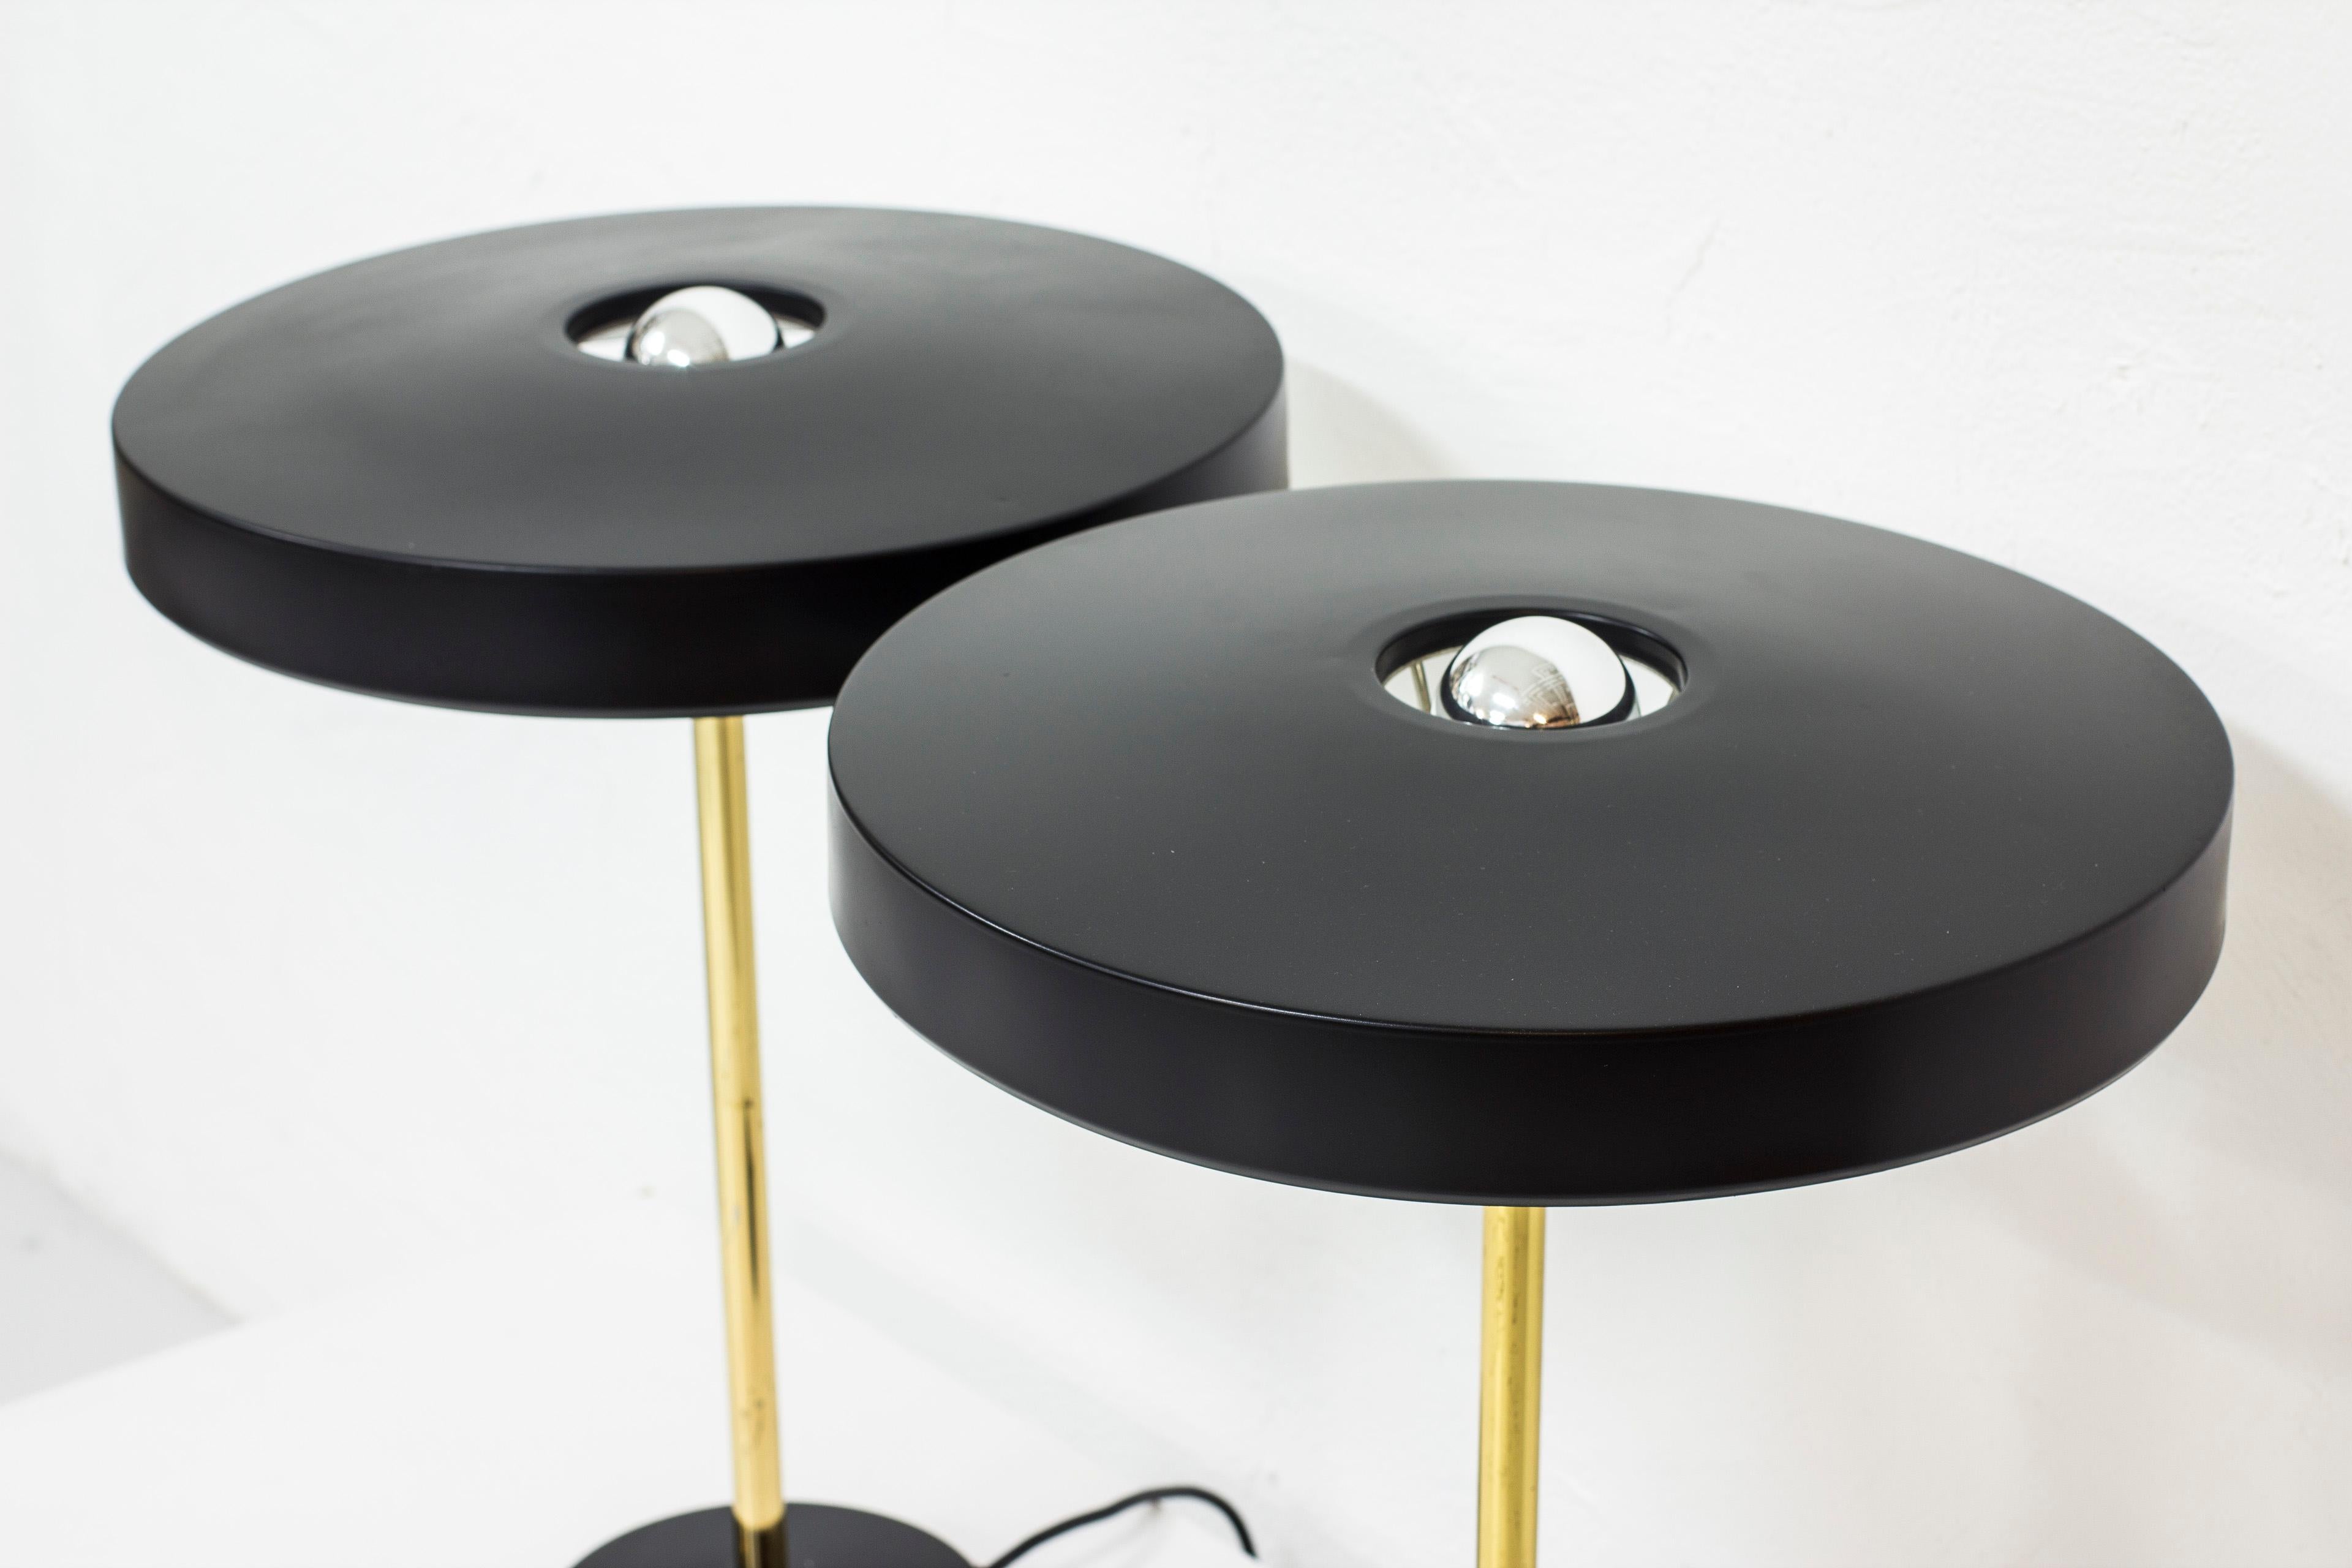 Table lamps designed by Louis Kalff. Produced by Philips in the Netherlands during the 1960s. Black lacquered metal and polished brass. Light switch on the base in working order. Good vintage condition with signs of wear and patina.


Price for